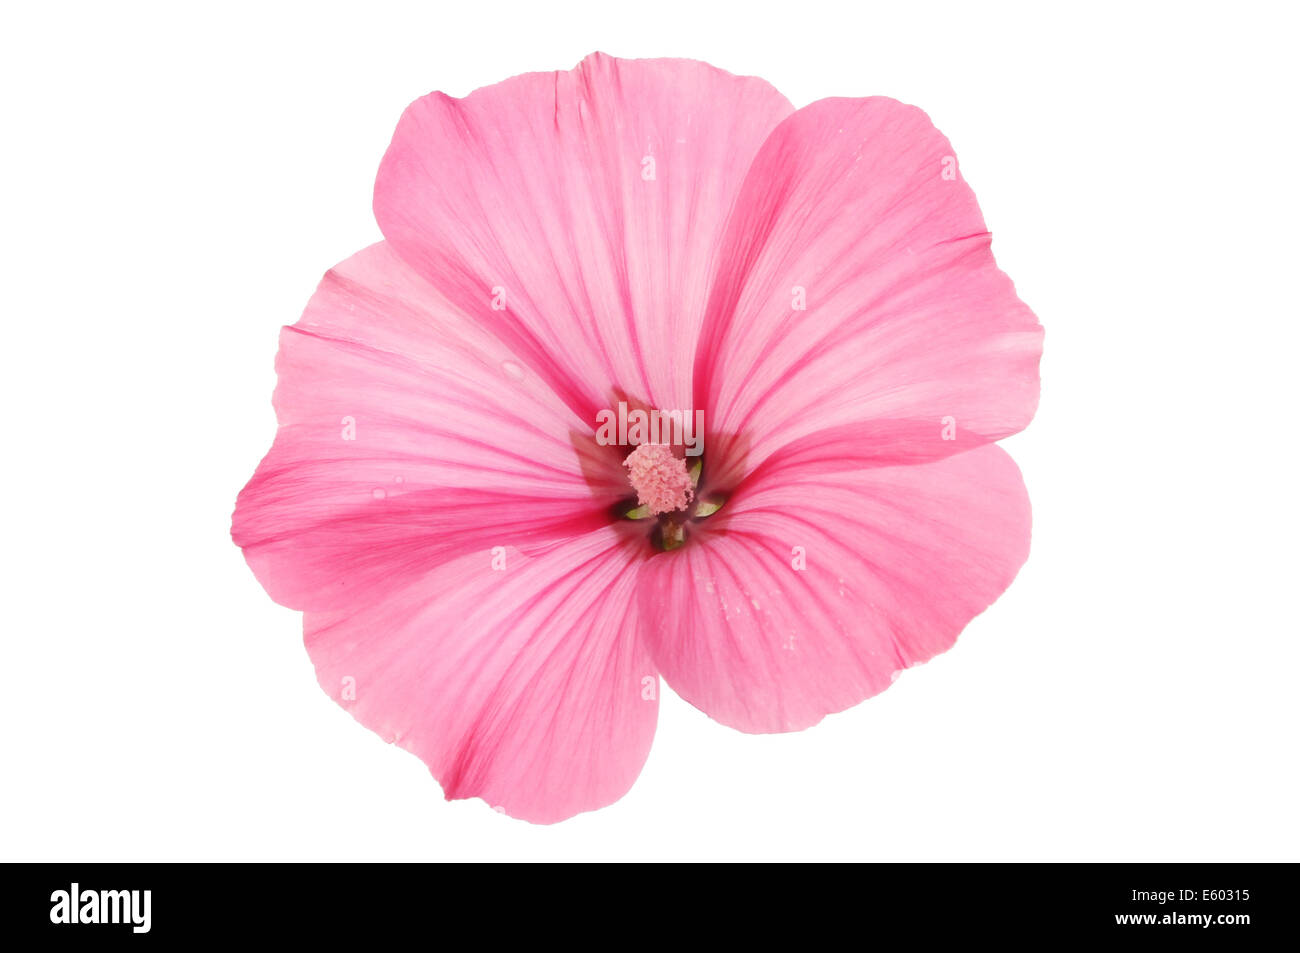 Single pink Lavatera flower isolated against white Stock Photo